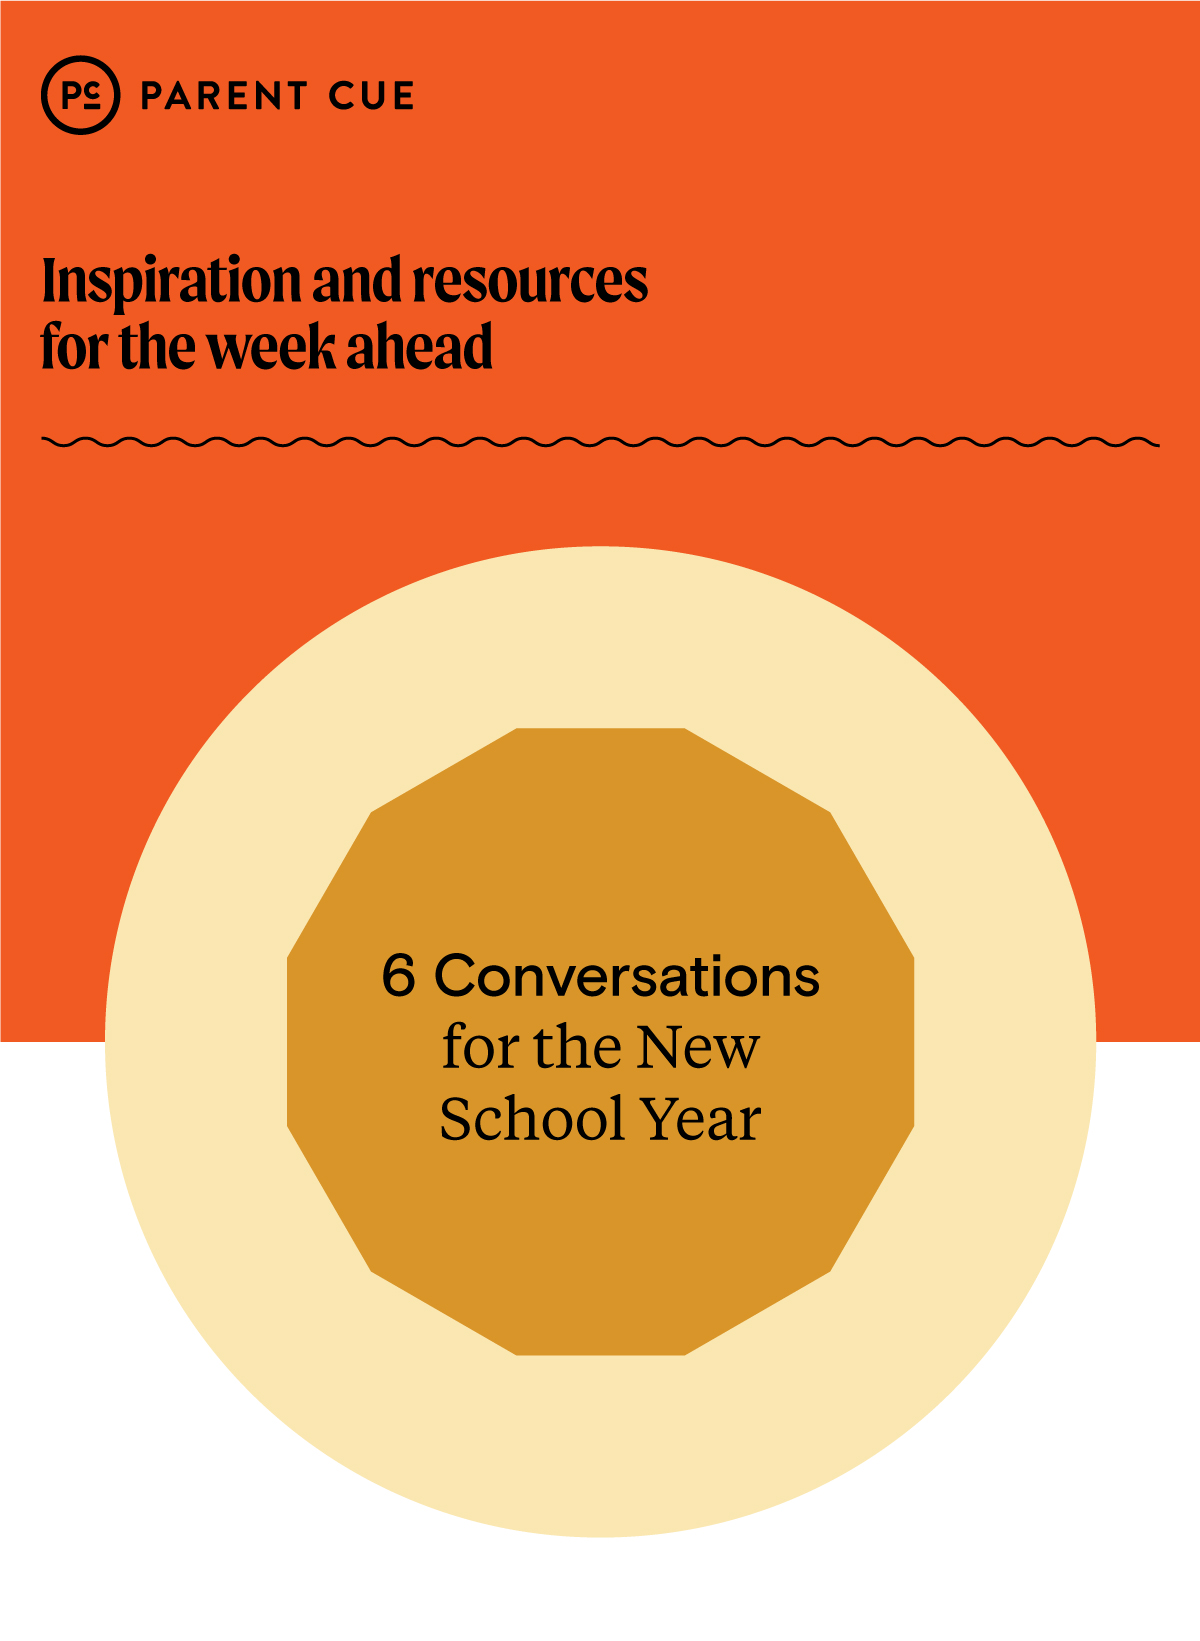 6 Conversations for the New School Year